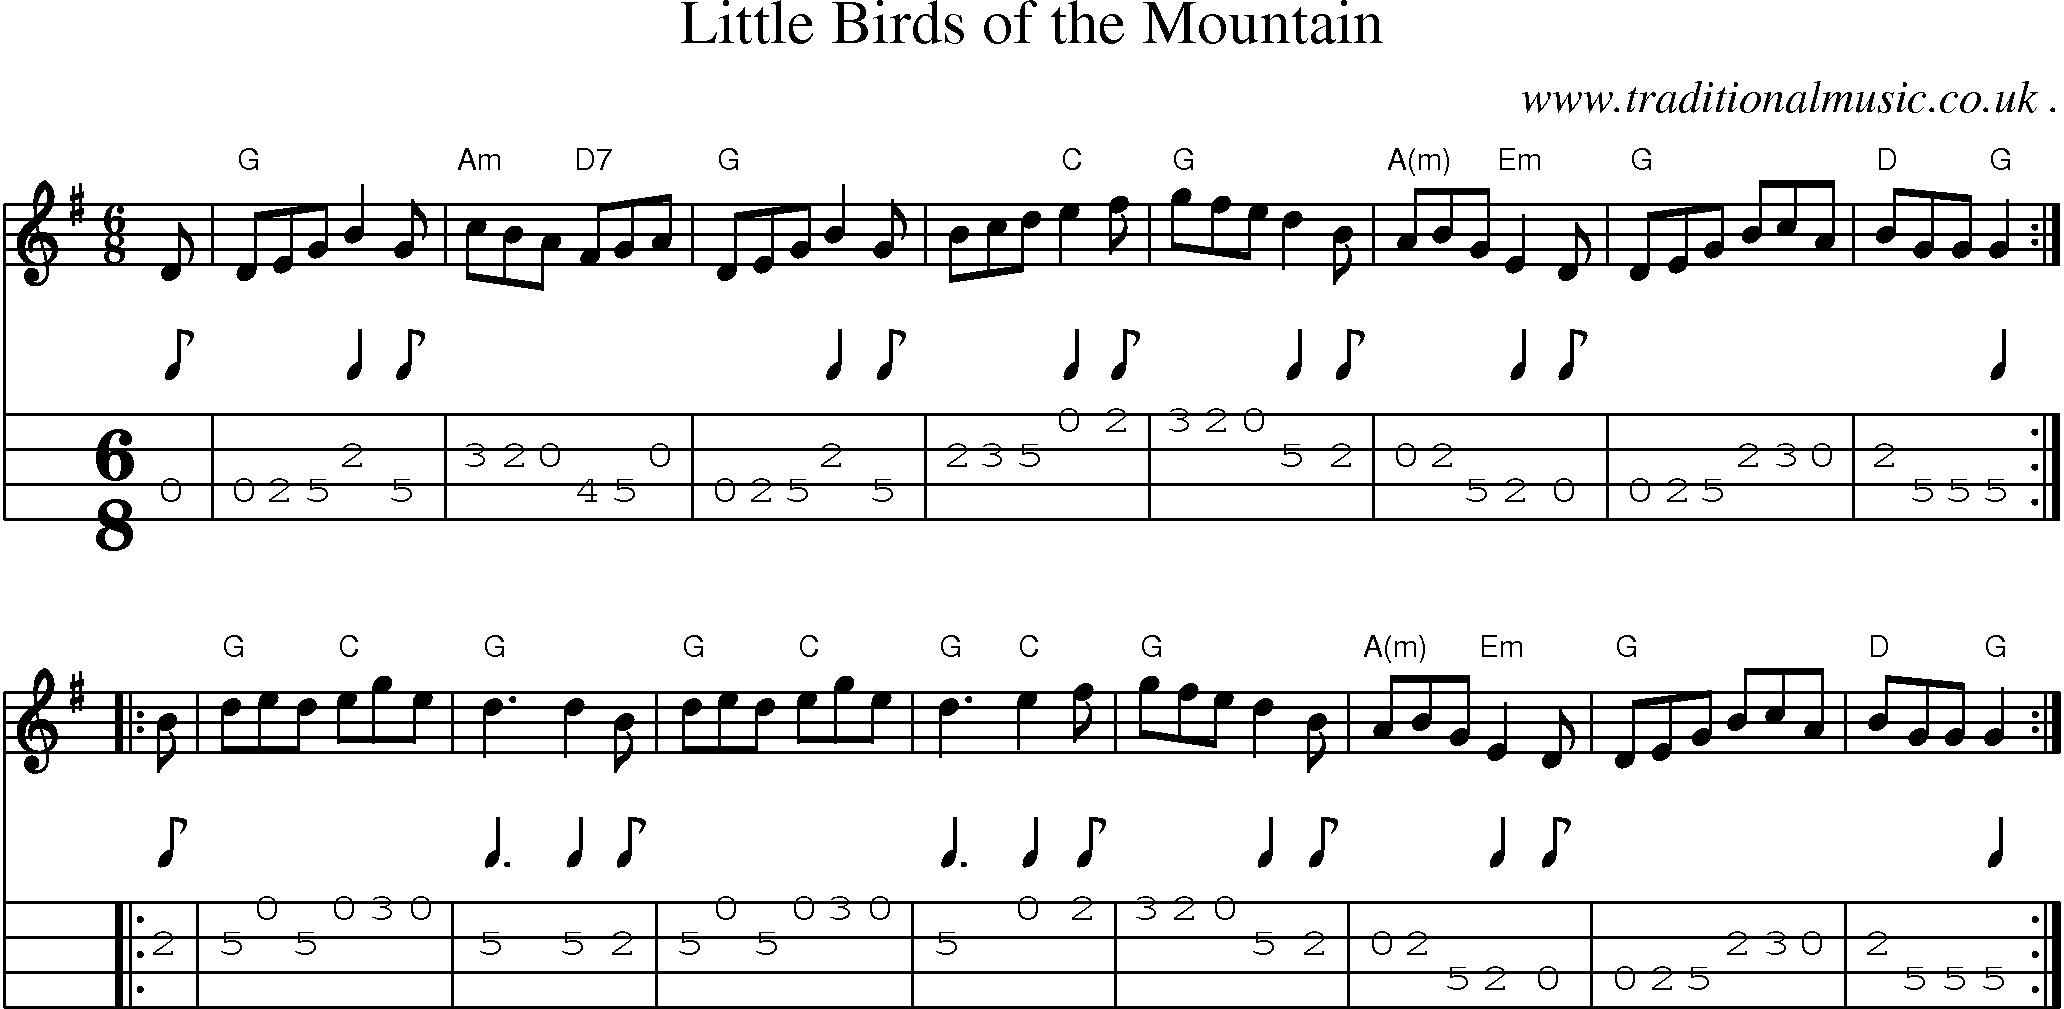 Sheet-music  score, Chords and Mandolin Tabs for Little Birds Of The Mountain